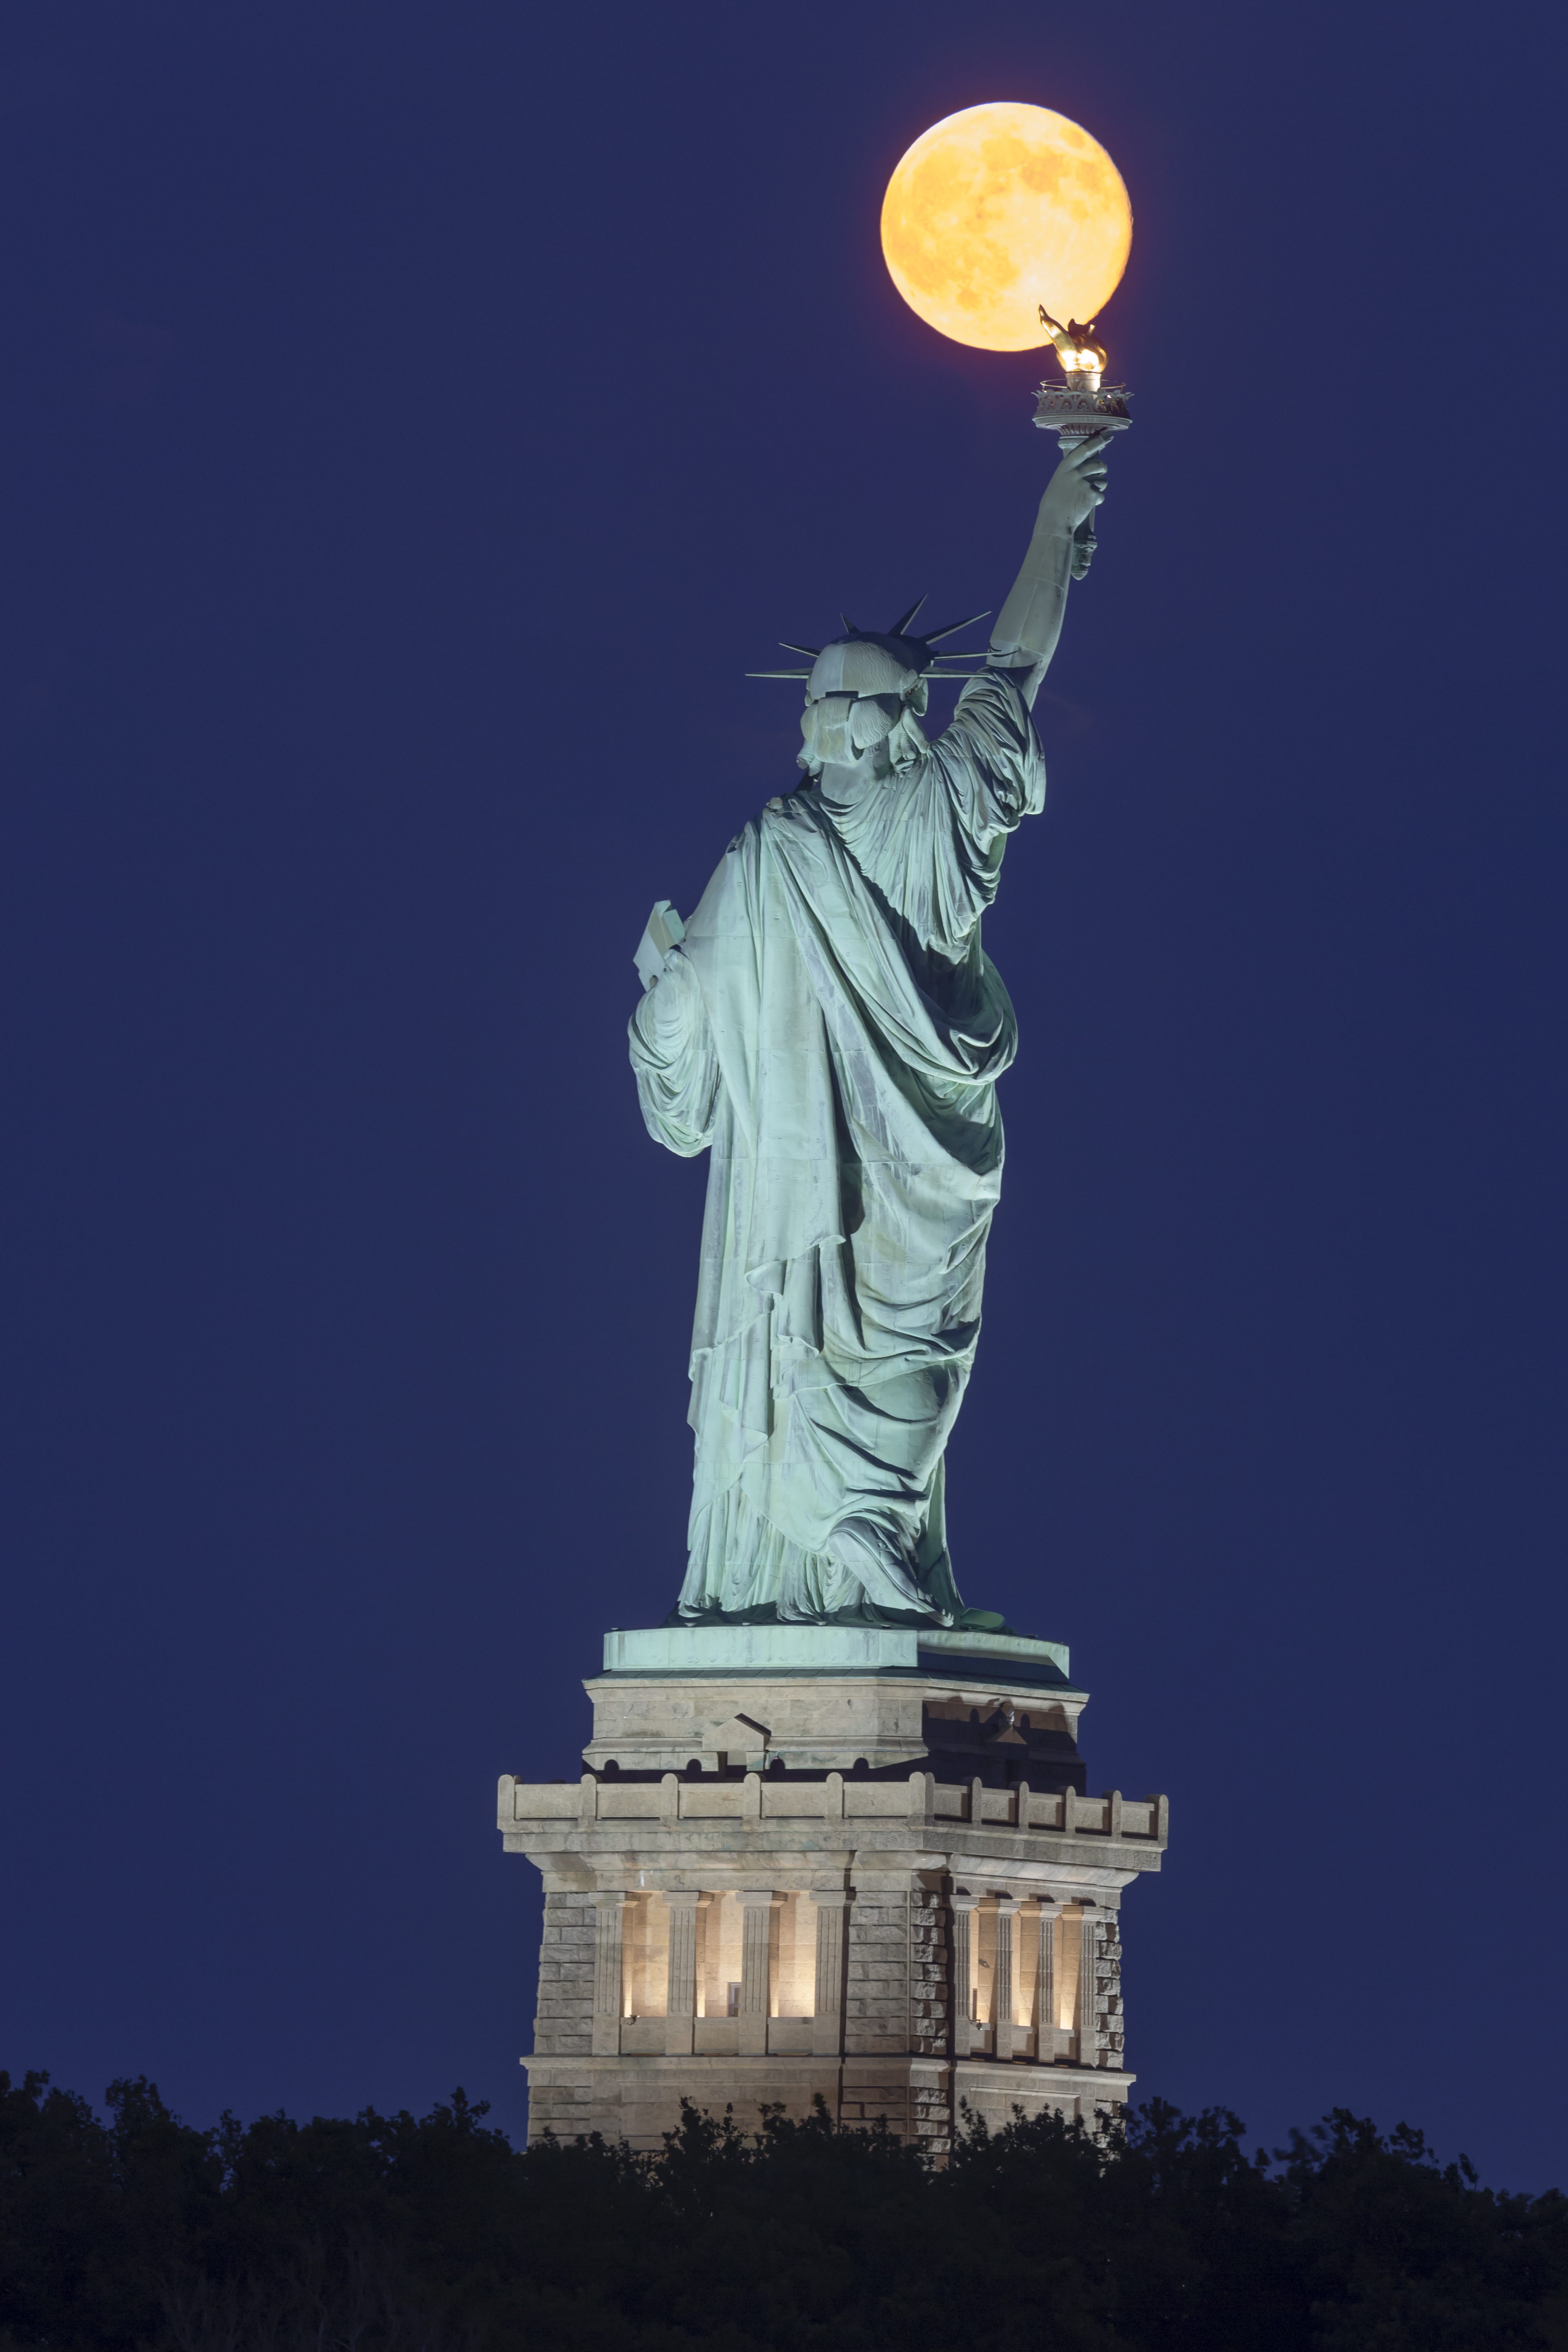 The super moon rises over the Statue of Liberty during the blue hour after sunset.